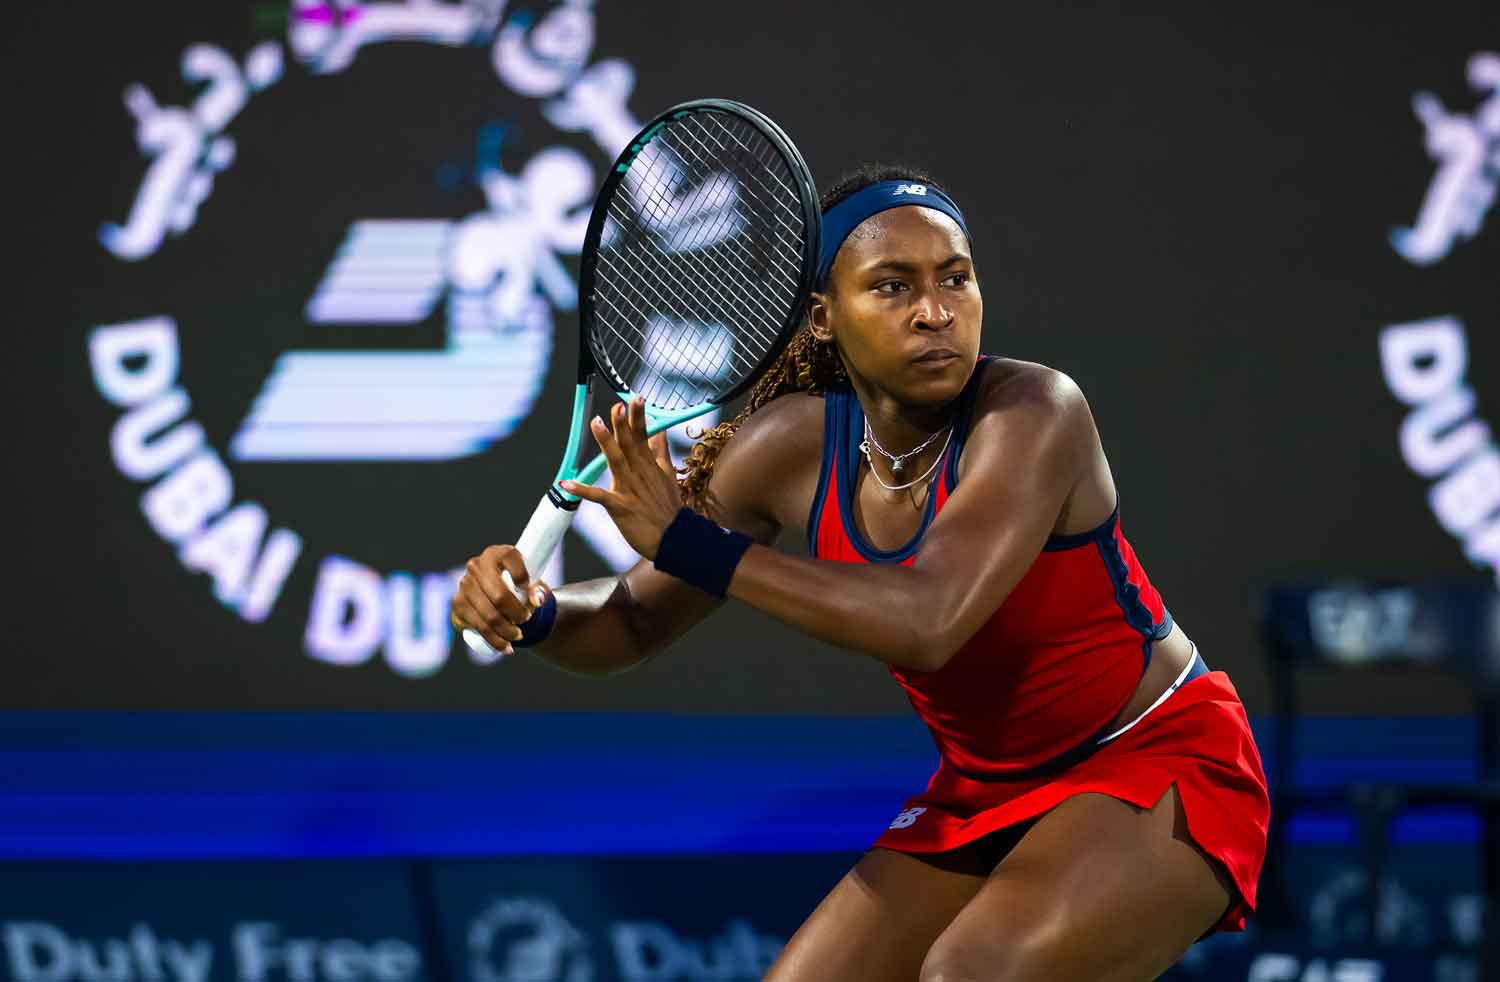 Coco Gauff stands on a tennis court holding up a racket and poised to hit a ball.